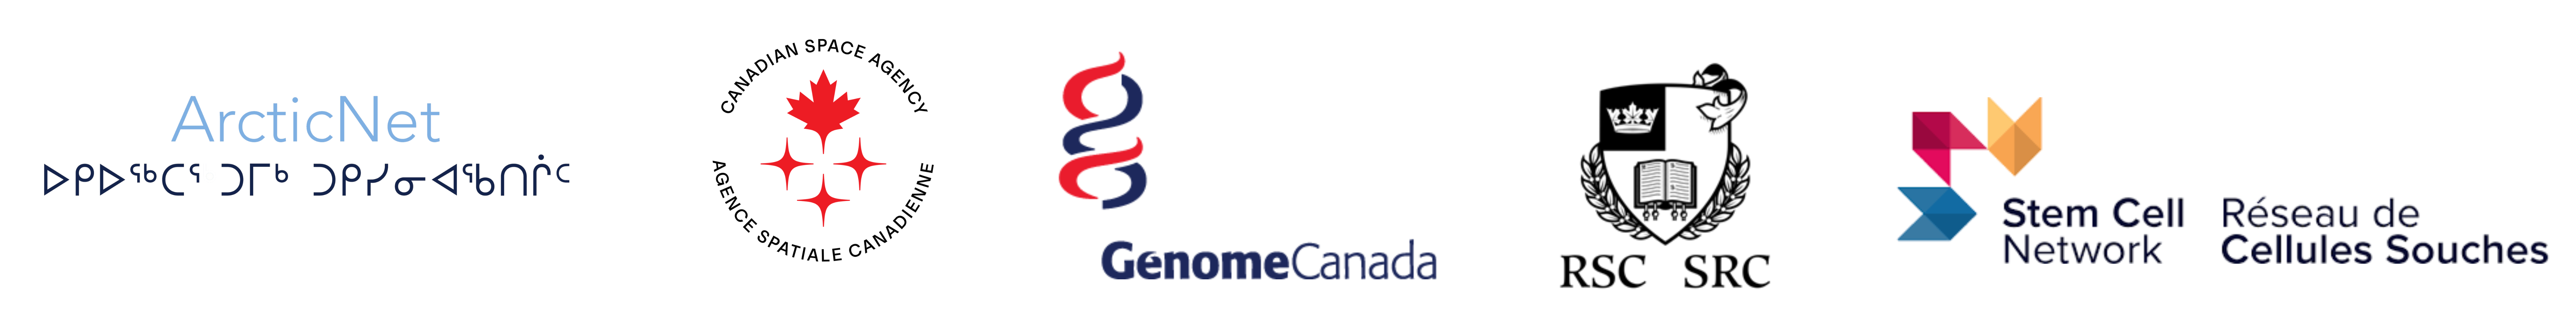 Arctic Net, Canadian Space Agency, Genome Canada, Royal Society of Canada, STEM Cell Network